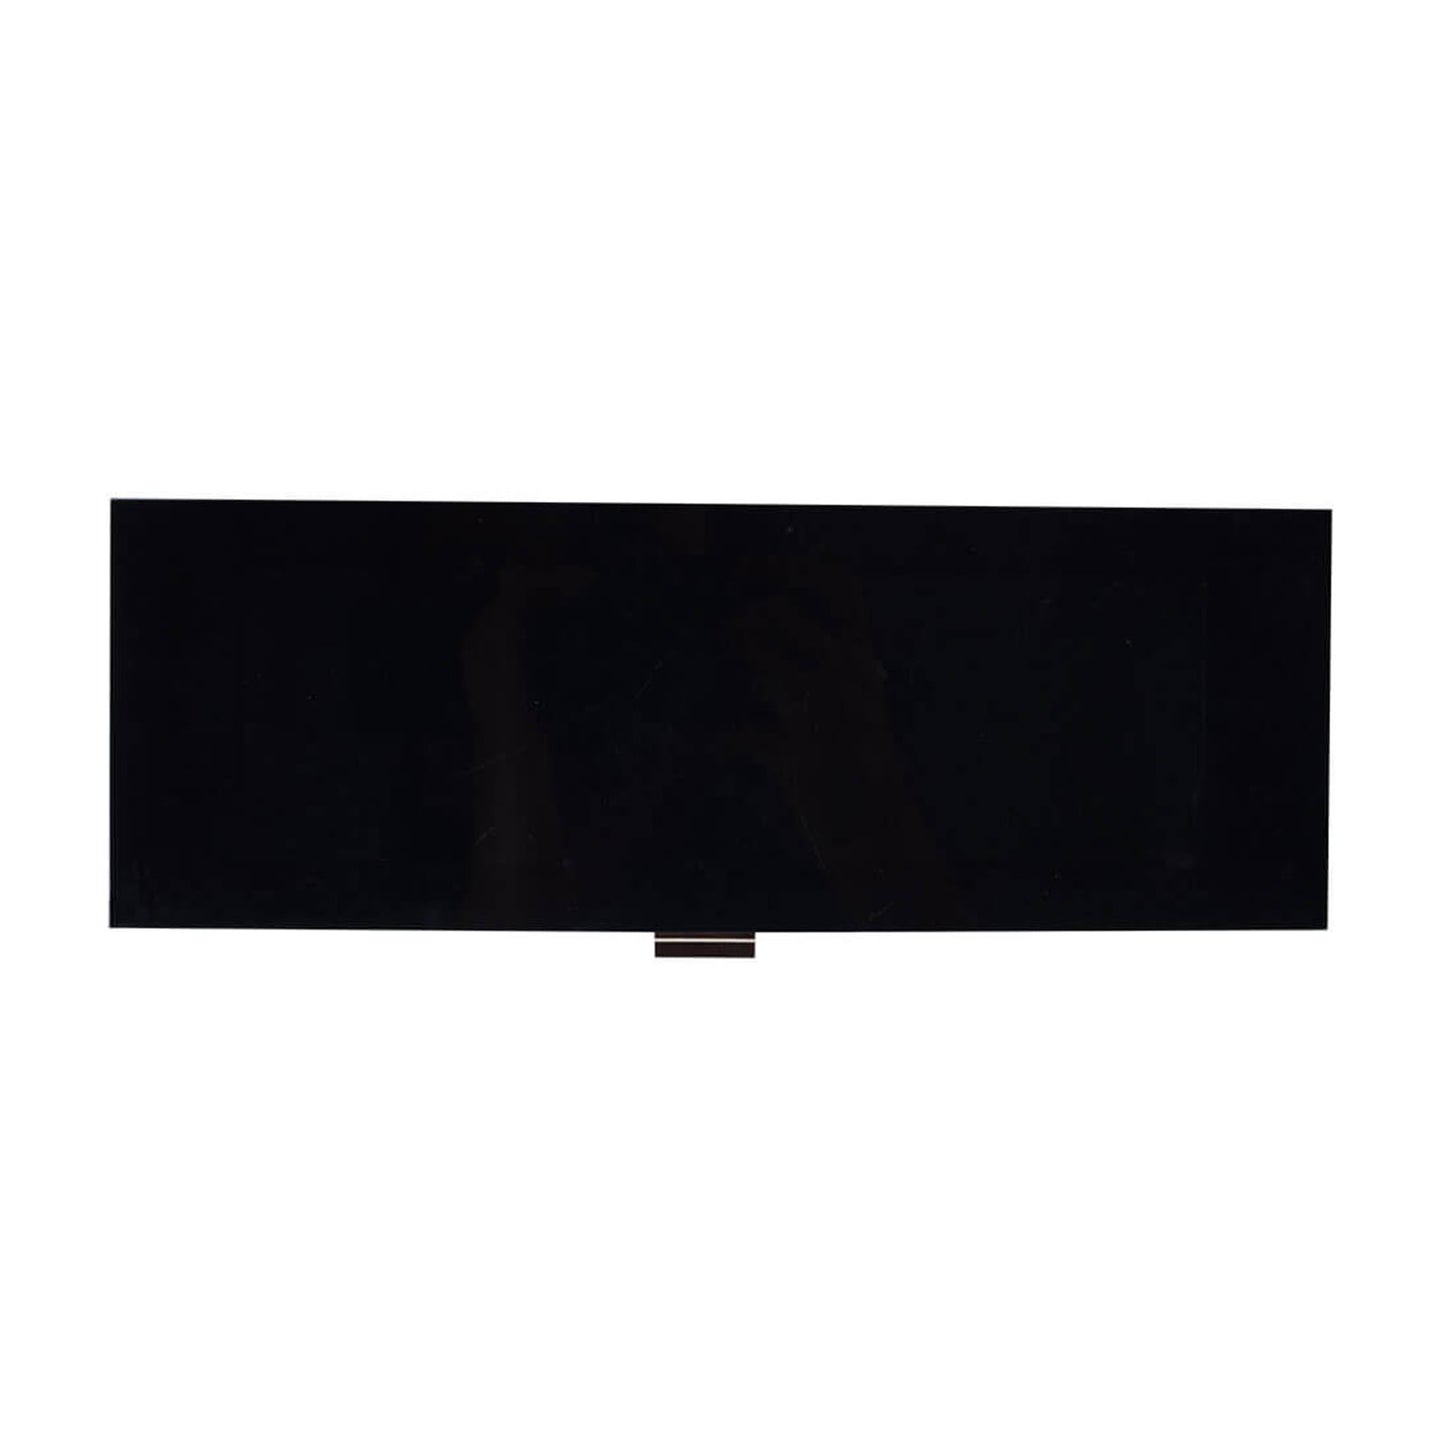 8.0-inch BAR type IPS display with 1600x480 resolution, capacitive touch, and LVDS connection